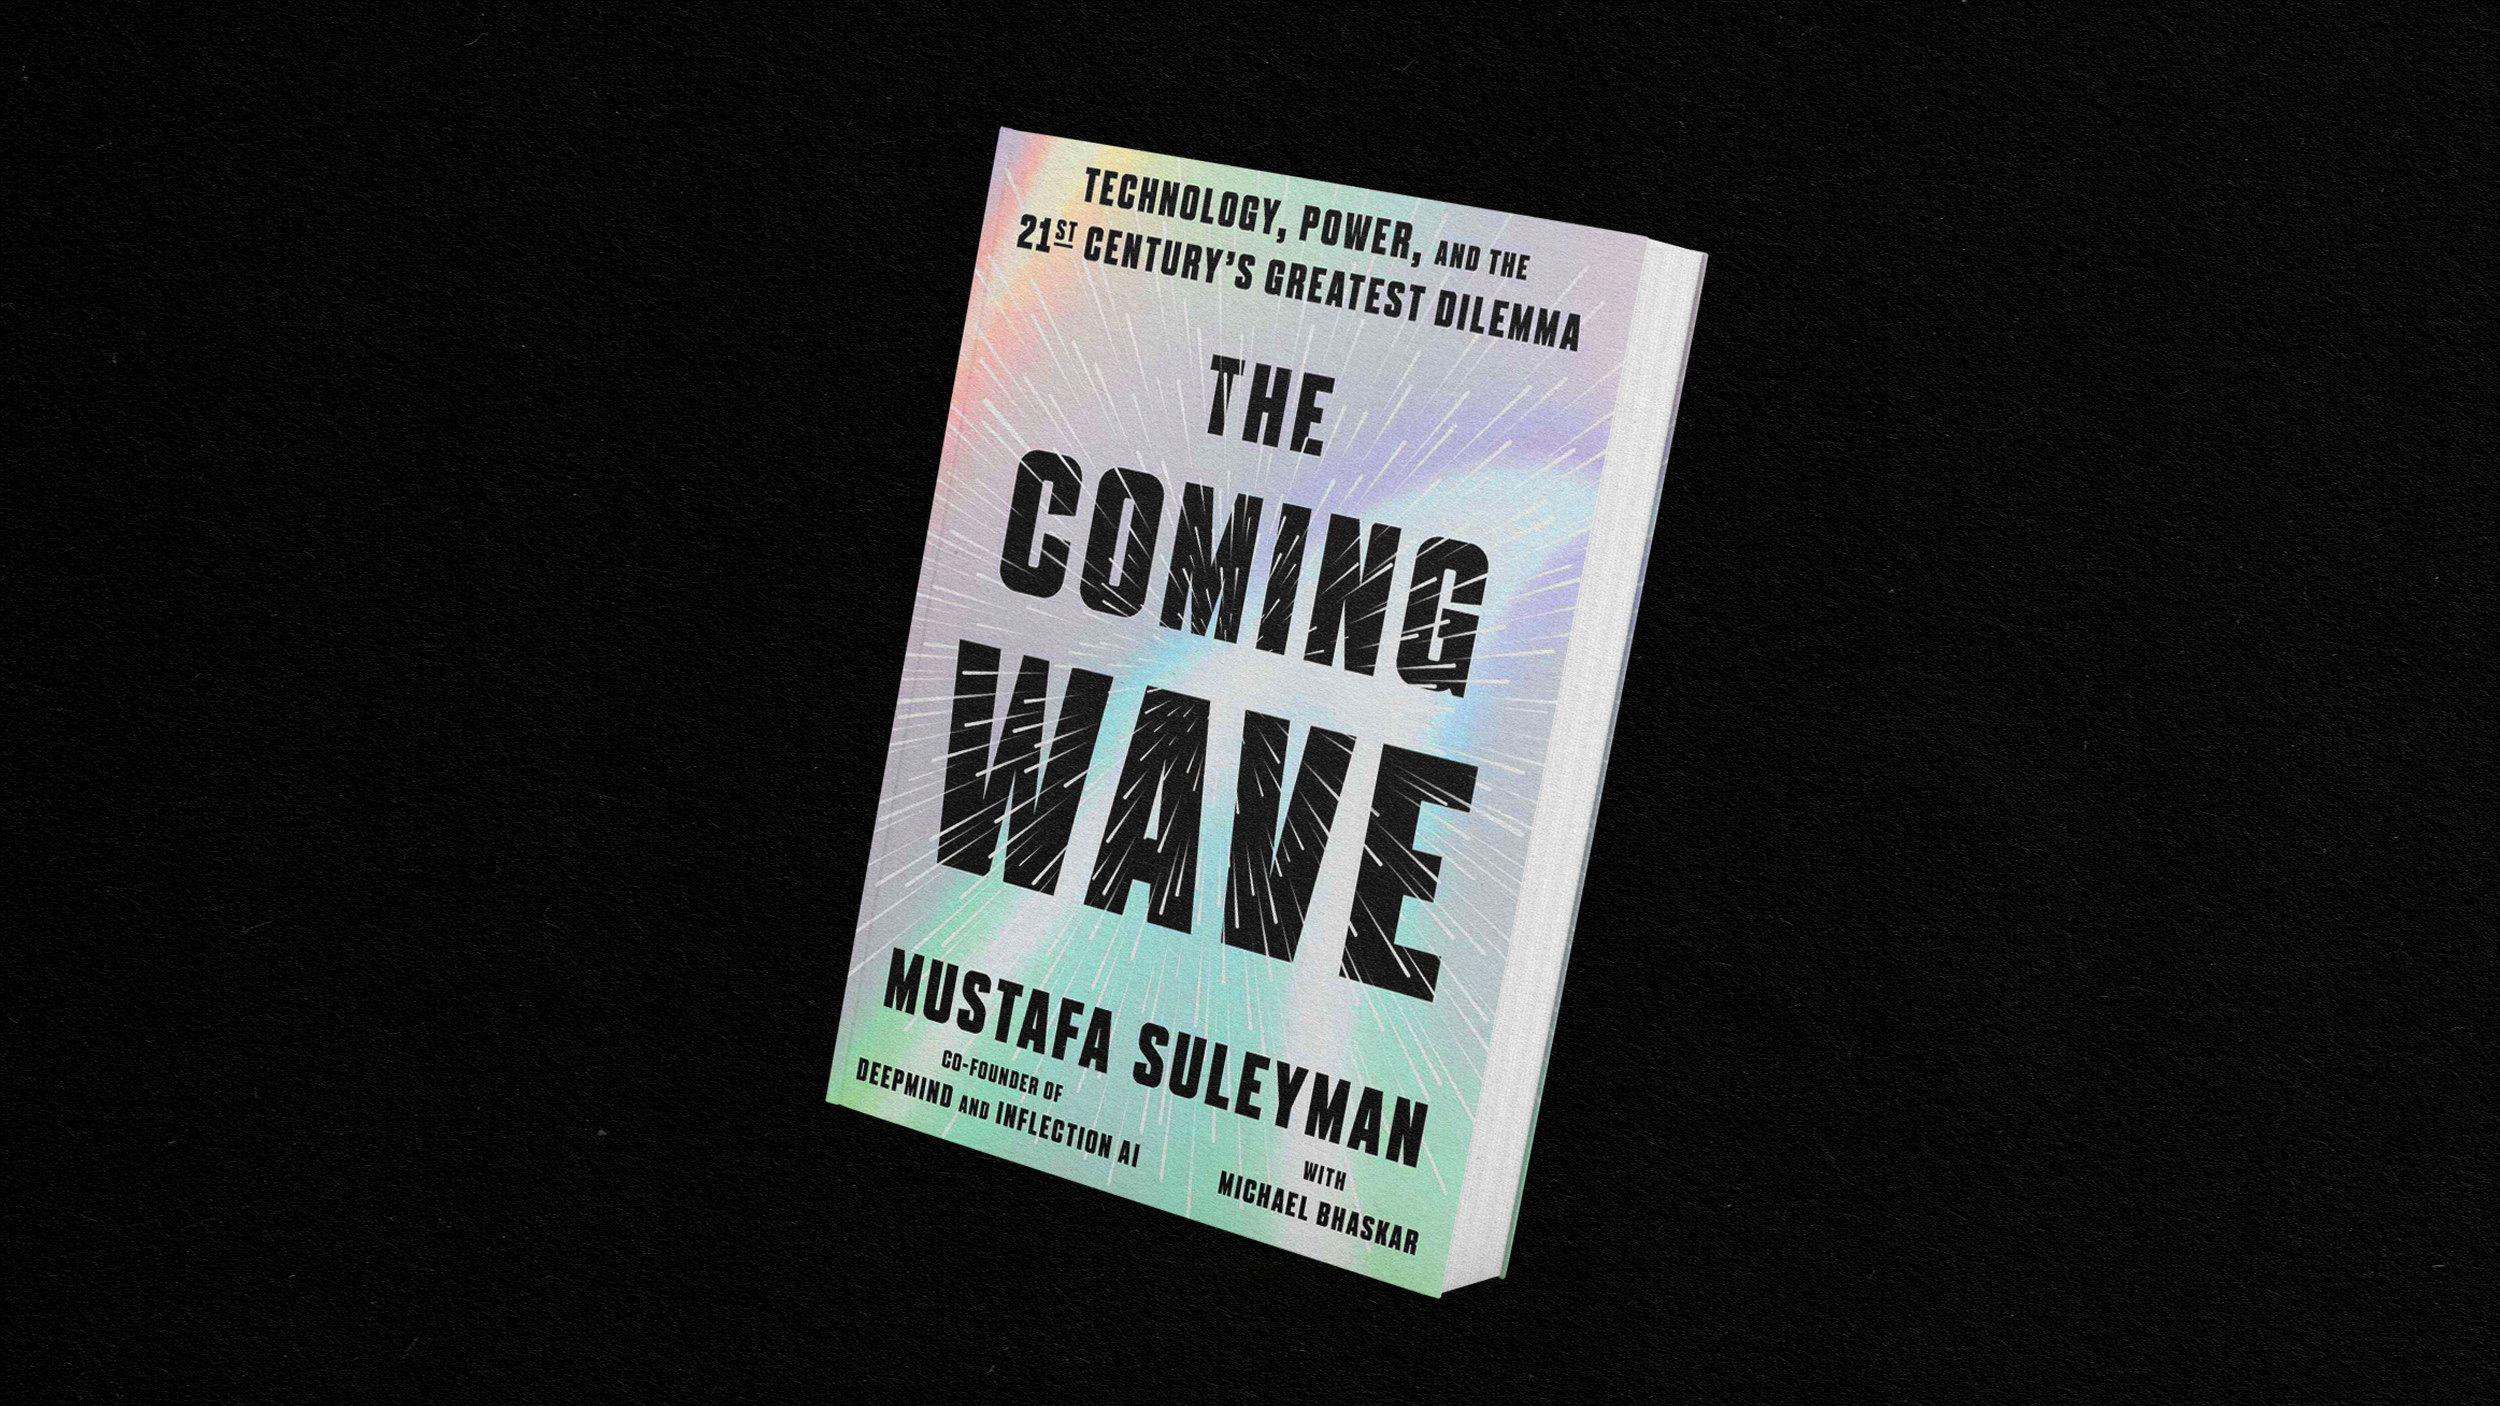 A book titled "The Coming Wave" on containment.